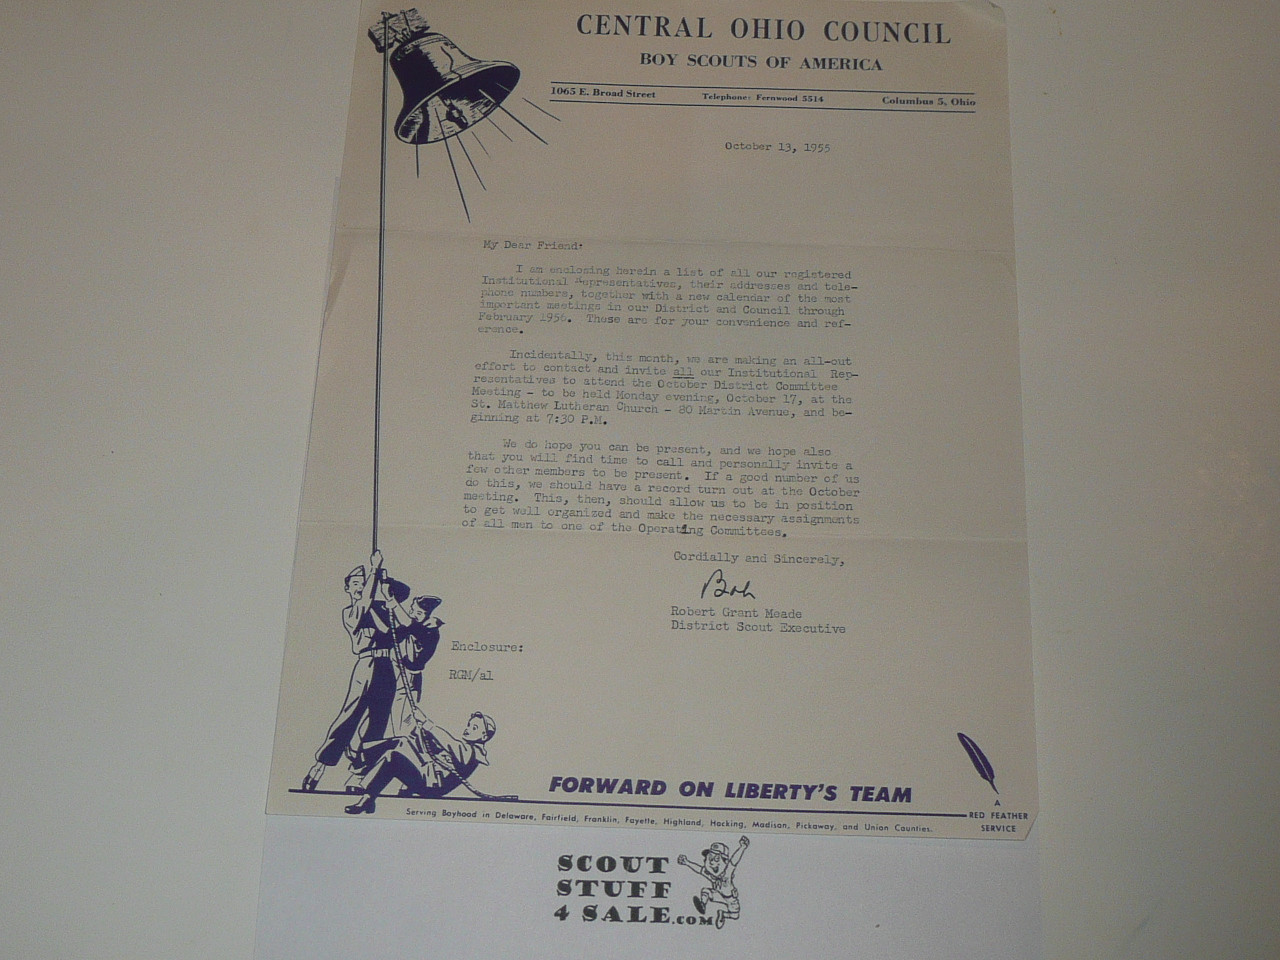 1955 Central Ohio Council Stationary